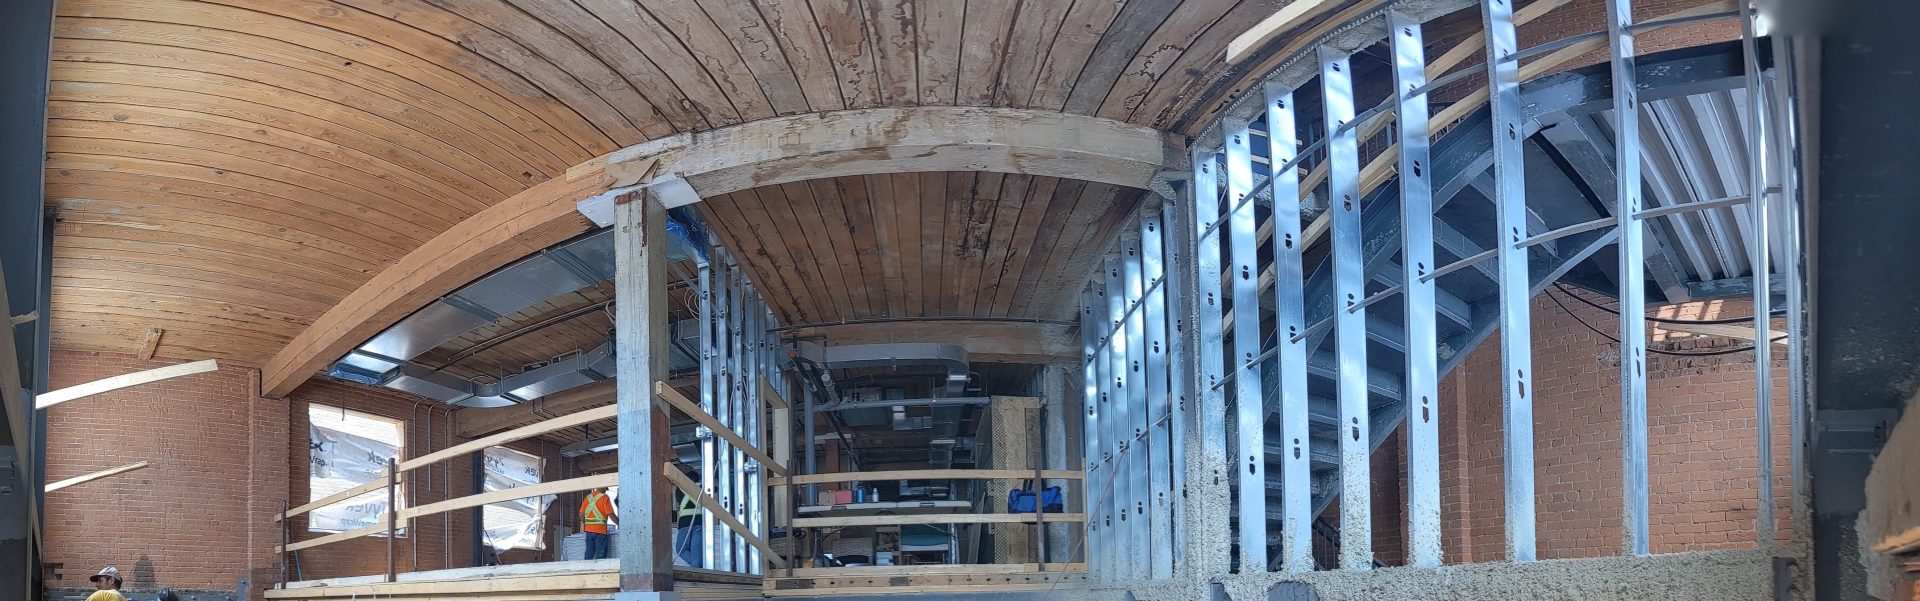 A panorama view of the ceiling and support beams of 54 Wolseley under construction.